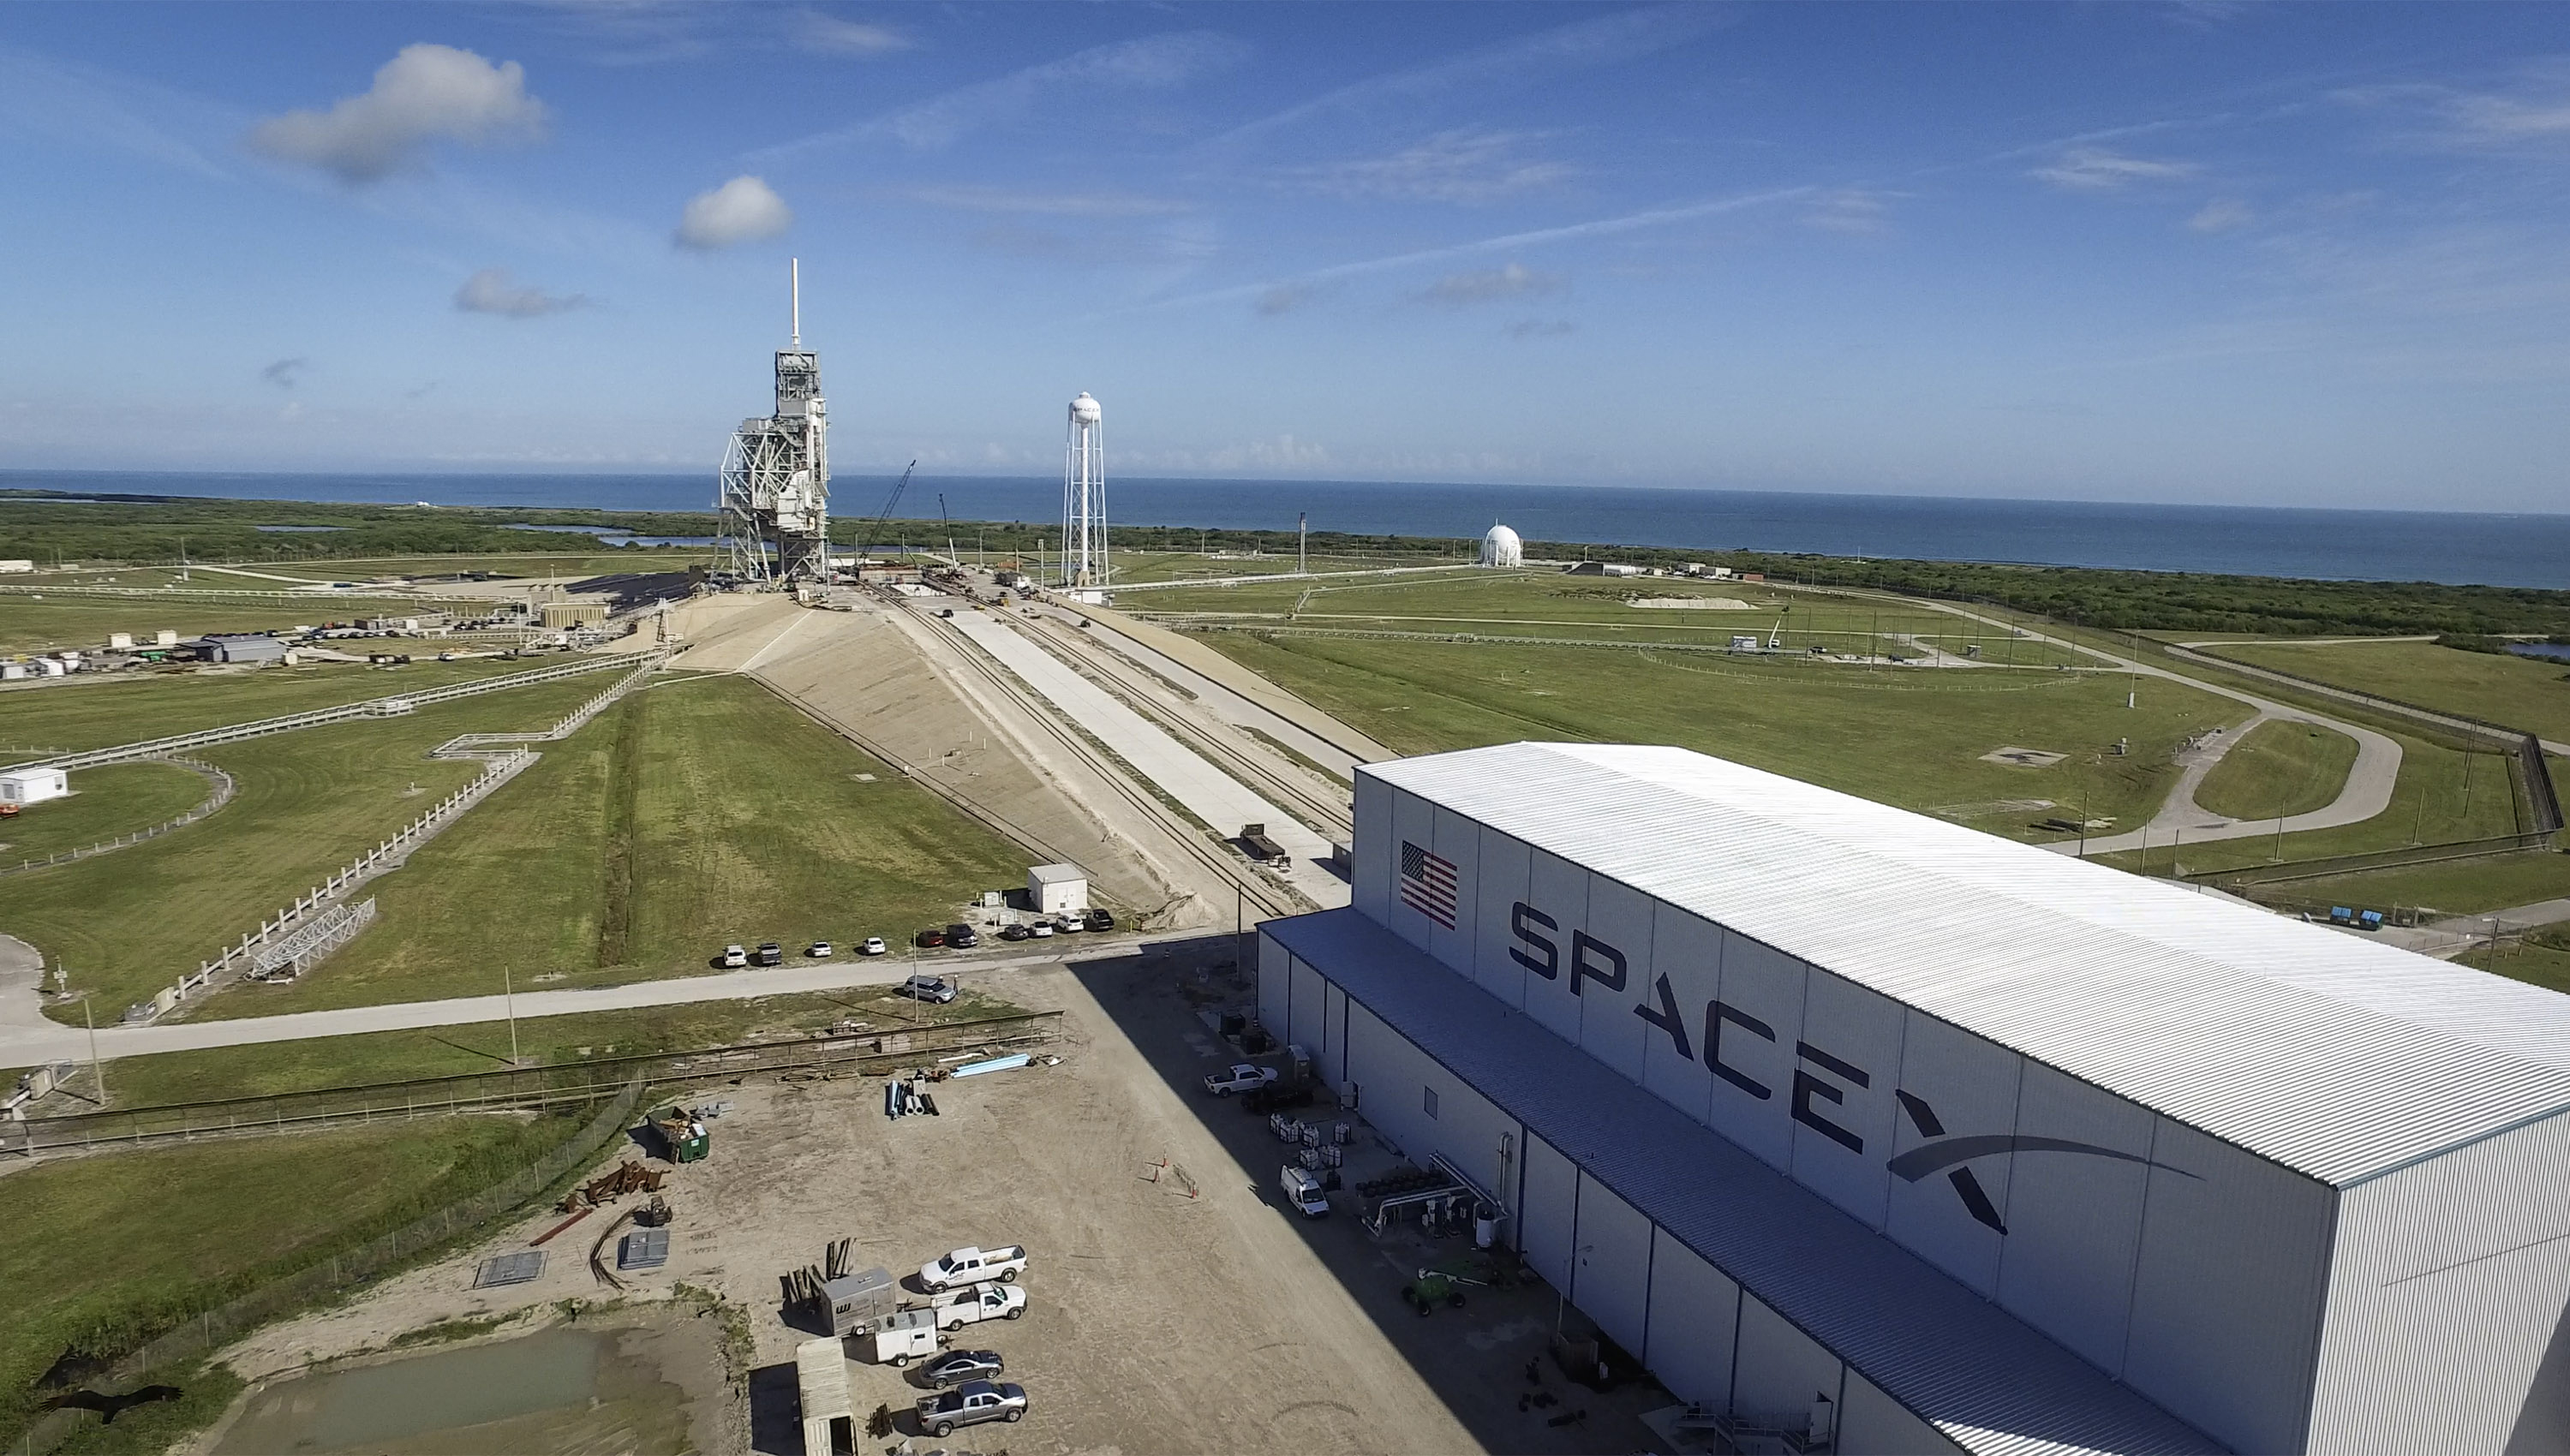 SpaceX Targets Jan. 30 for 1st Launch from Historic NASA Pad